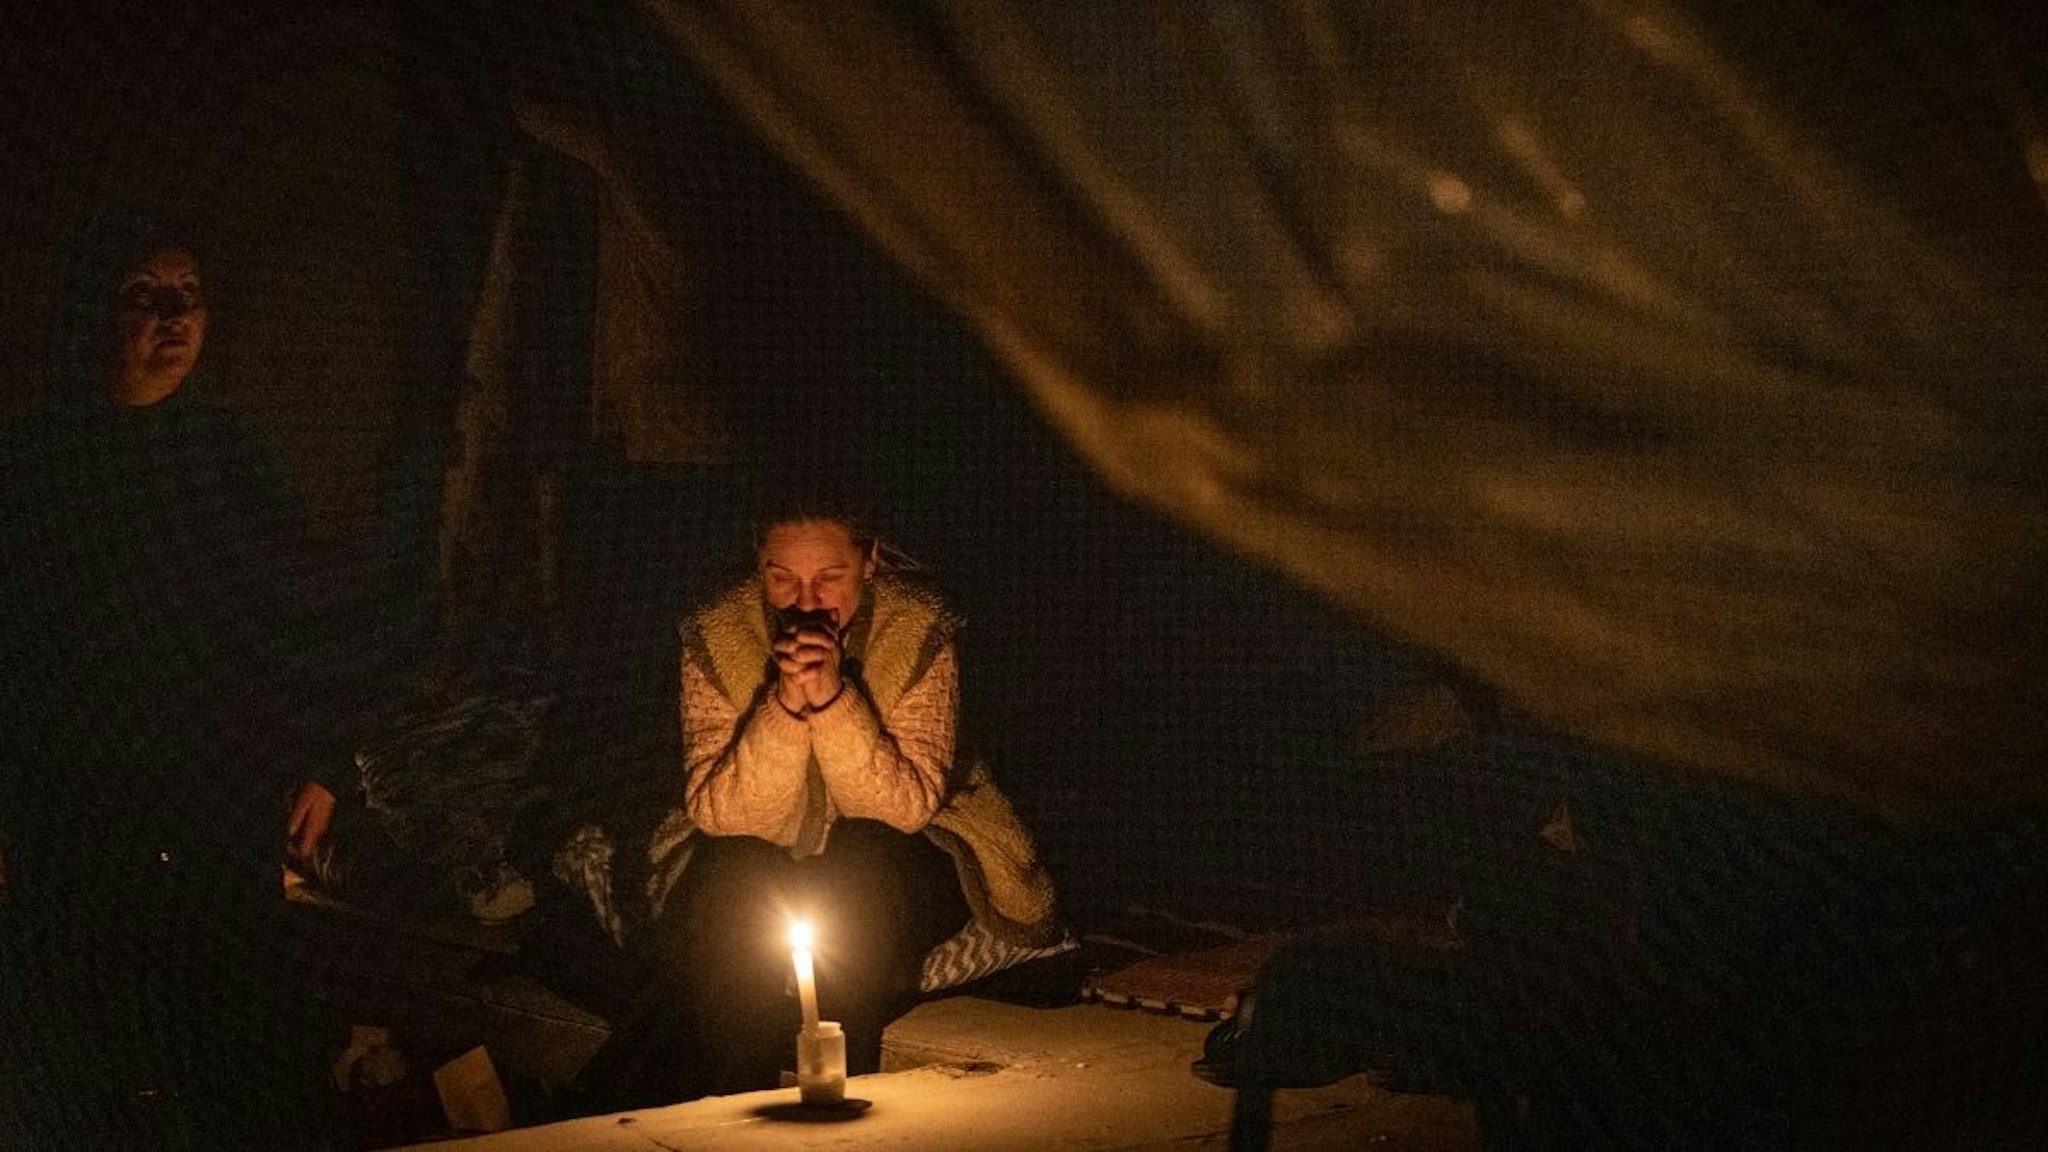 A resident prays while sheltering in by candle light in the basement of a building in Irpin as Russian forces moved through the city on March 07, 2022 in Irpin, Ukraine.